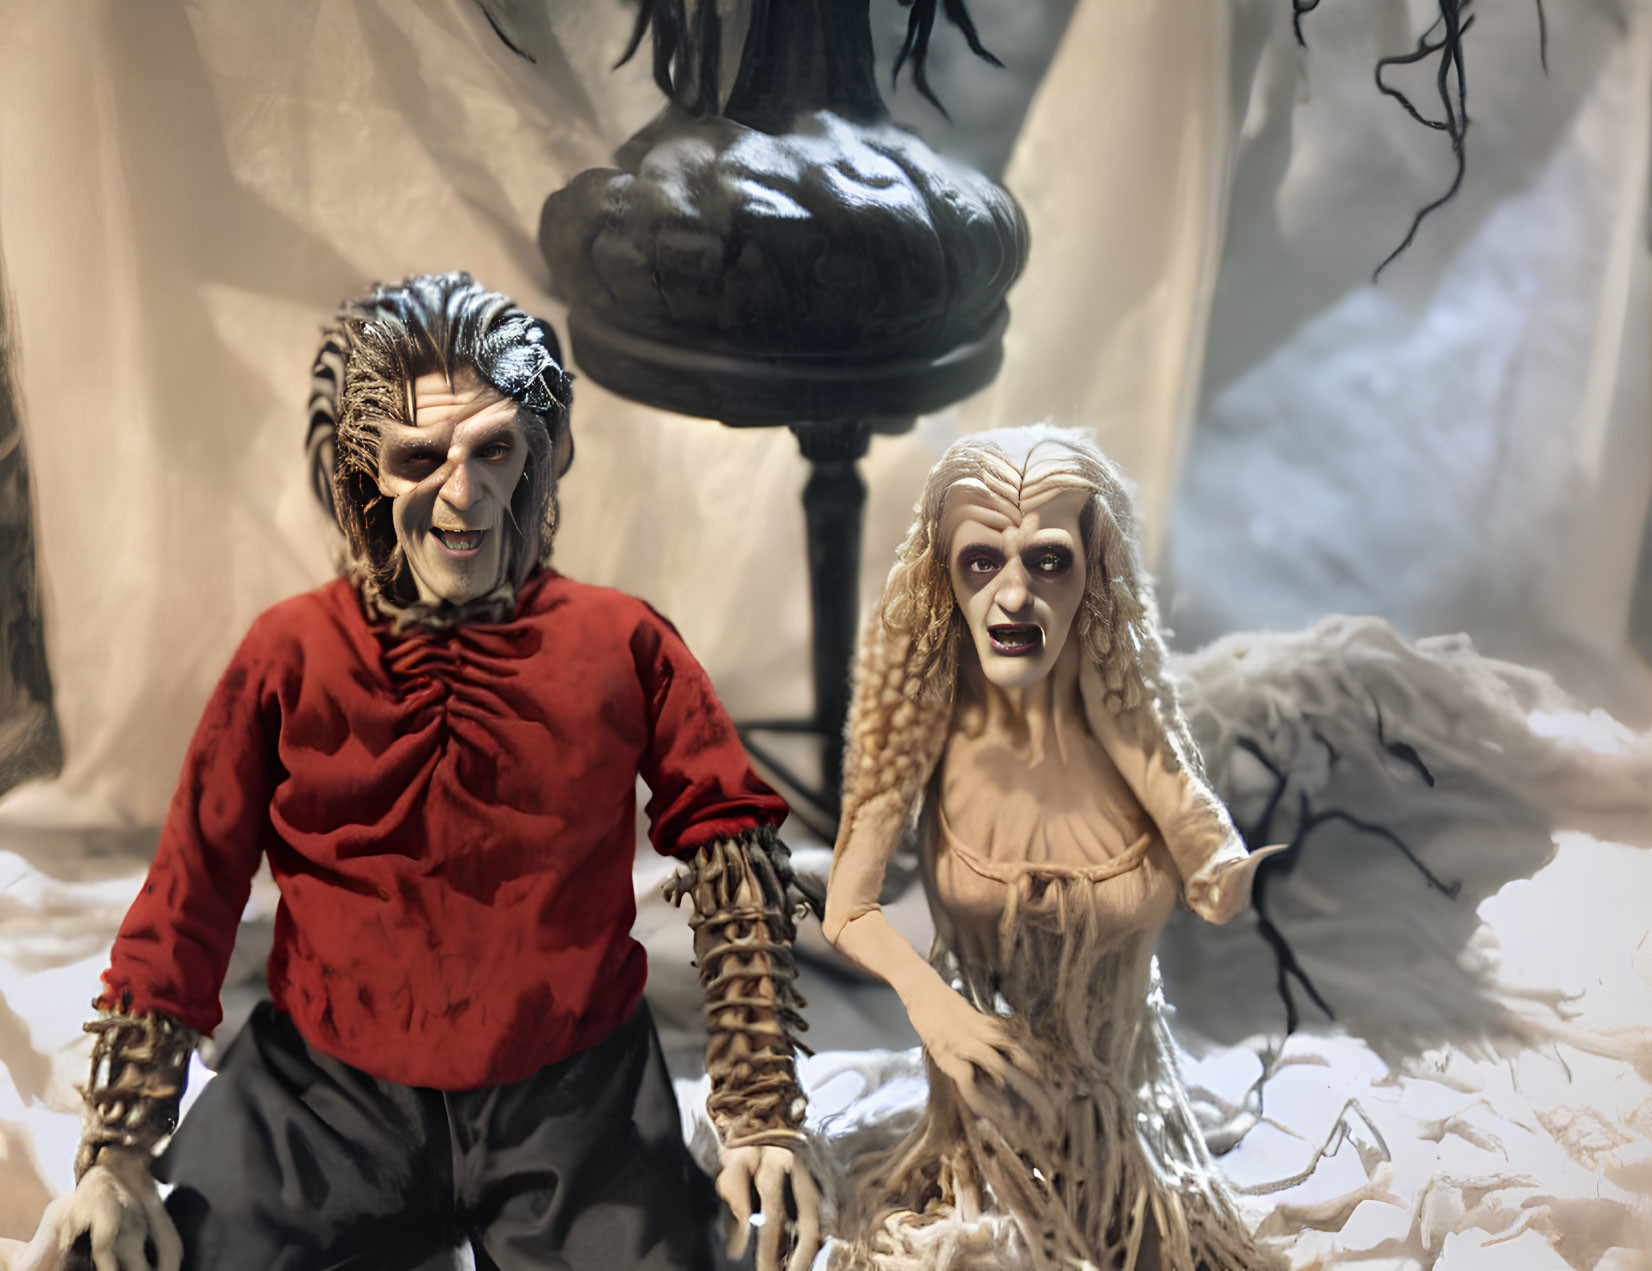 Male werewolf and female spectral figurines in spooky setting